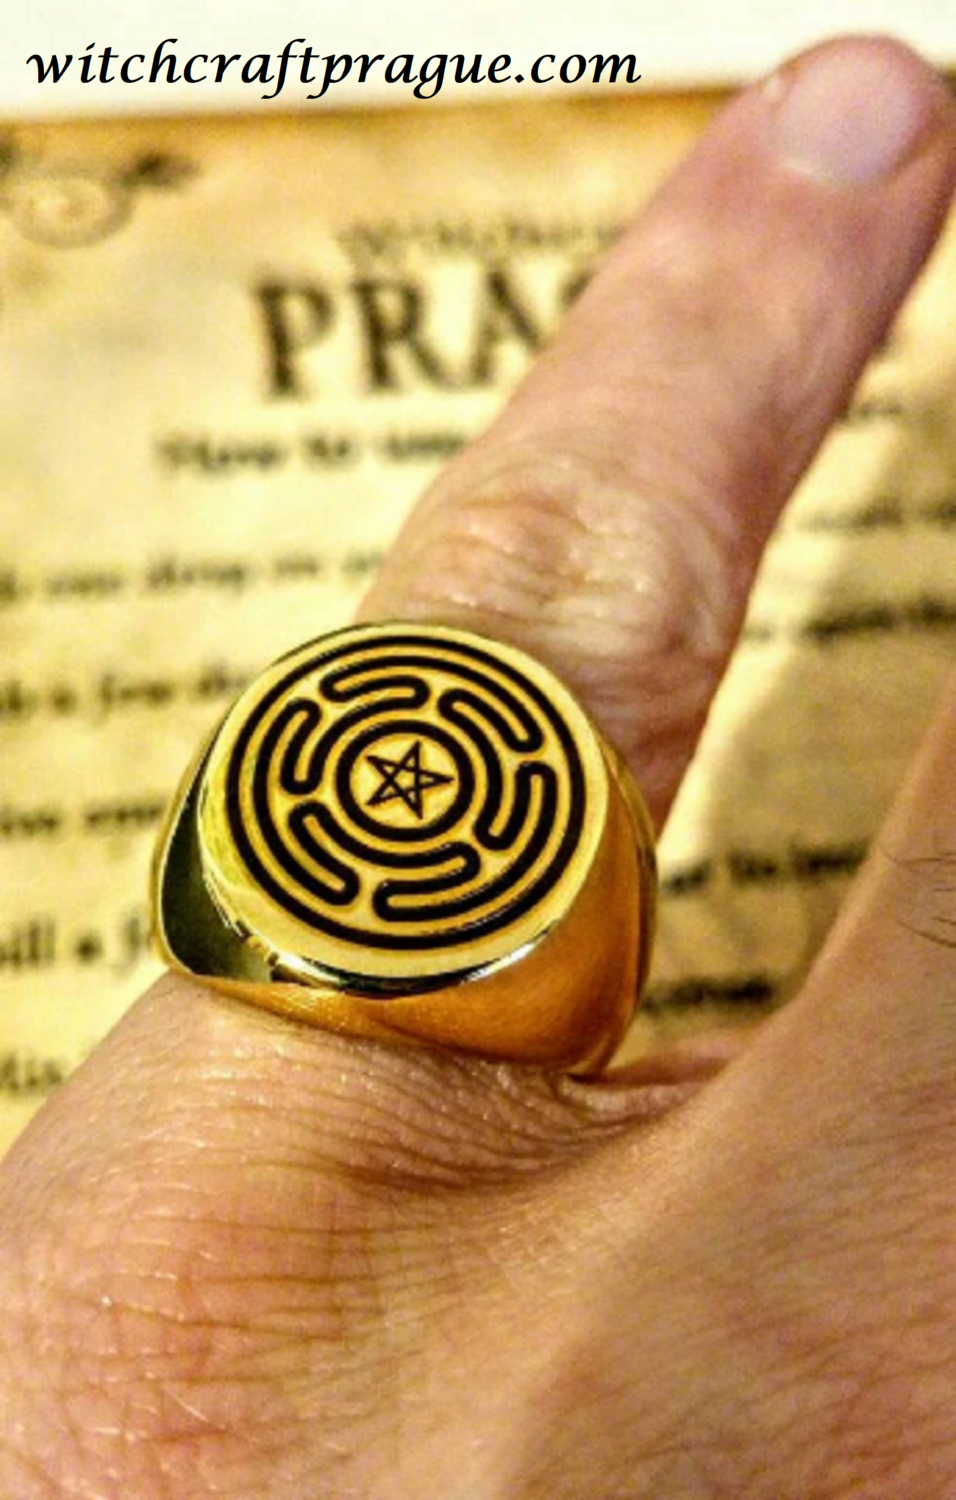 Witchcraft Hecate seal ring amulet Wicca talisman